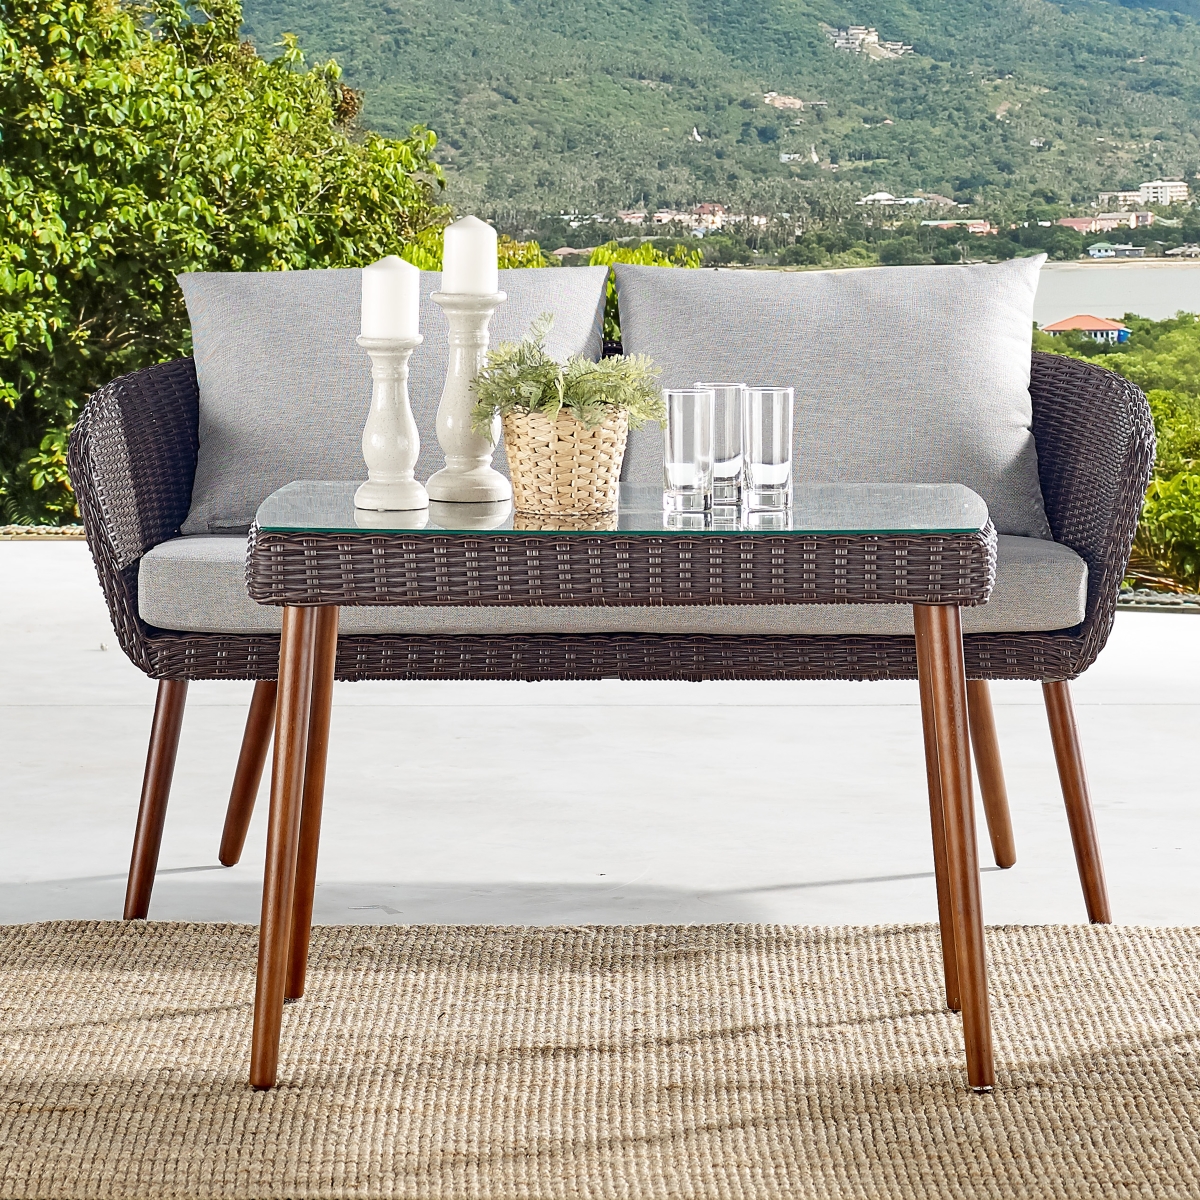 Picture of Alaterre AWWB02BB Athens All-Weather Wicker Two-Seat Outdoor Brown Bench with Light Gray Cushions